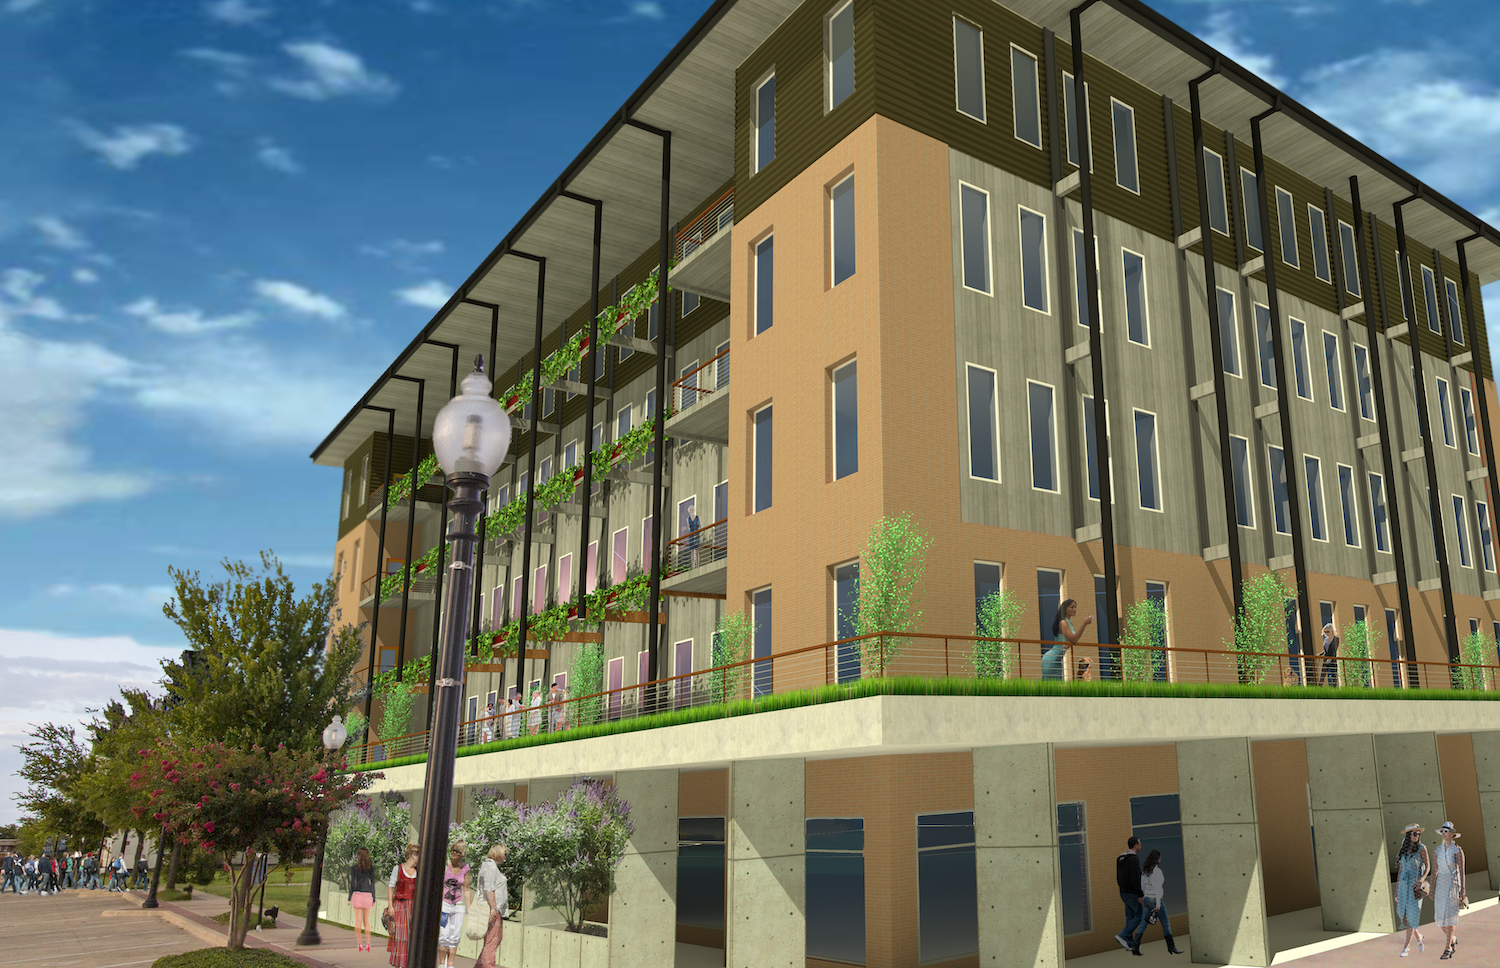 Caliber Breaks Ground on Multifamily Property in Texas Opportunity Zone